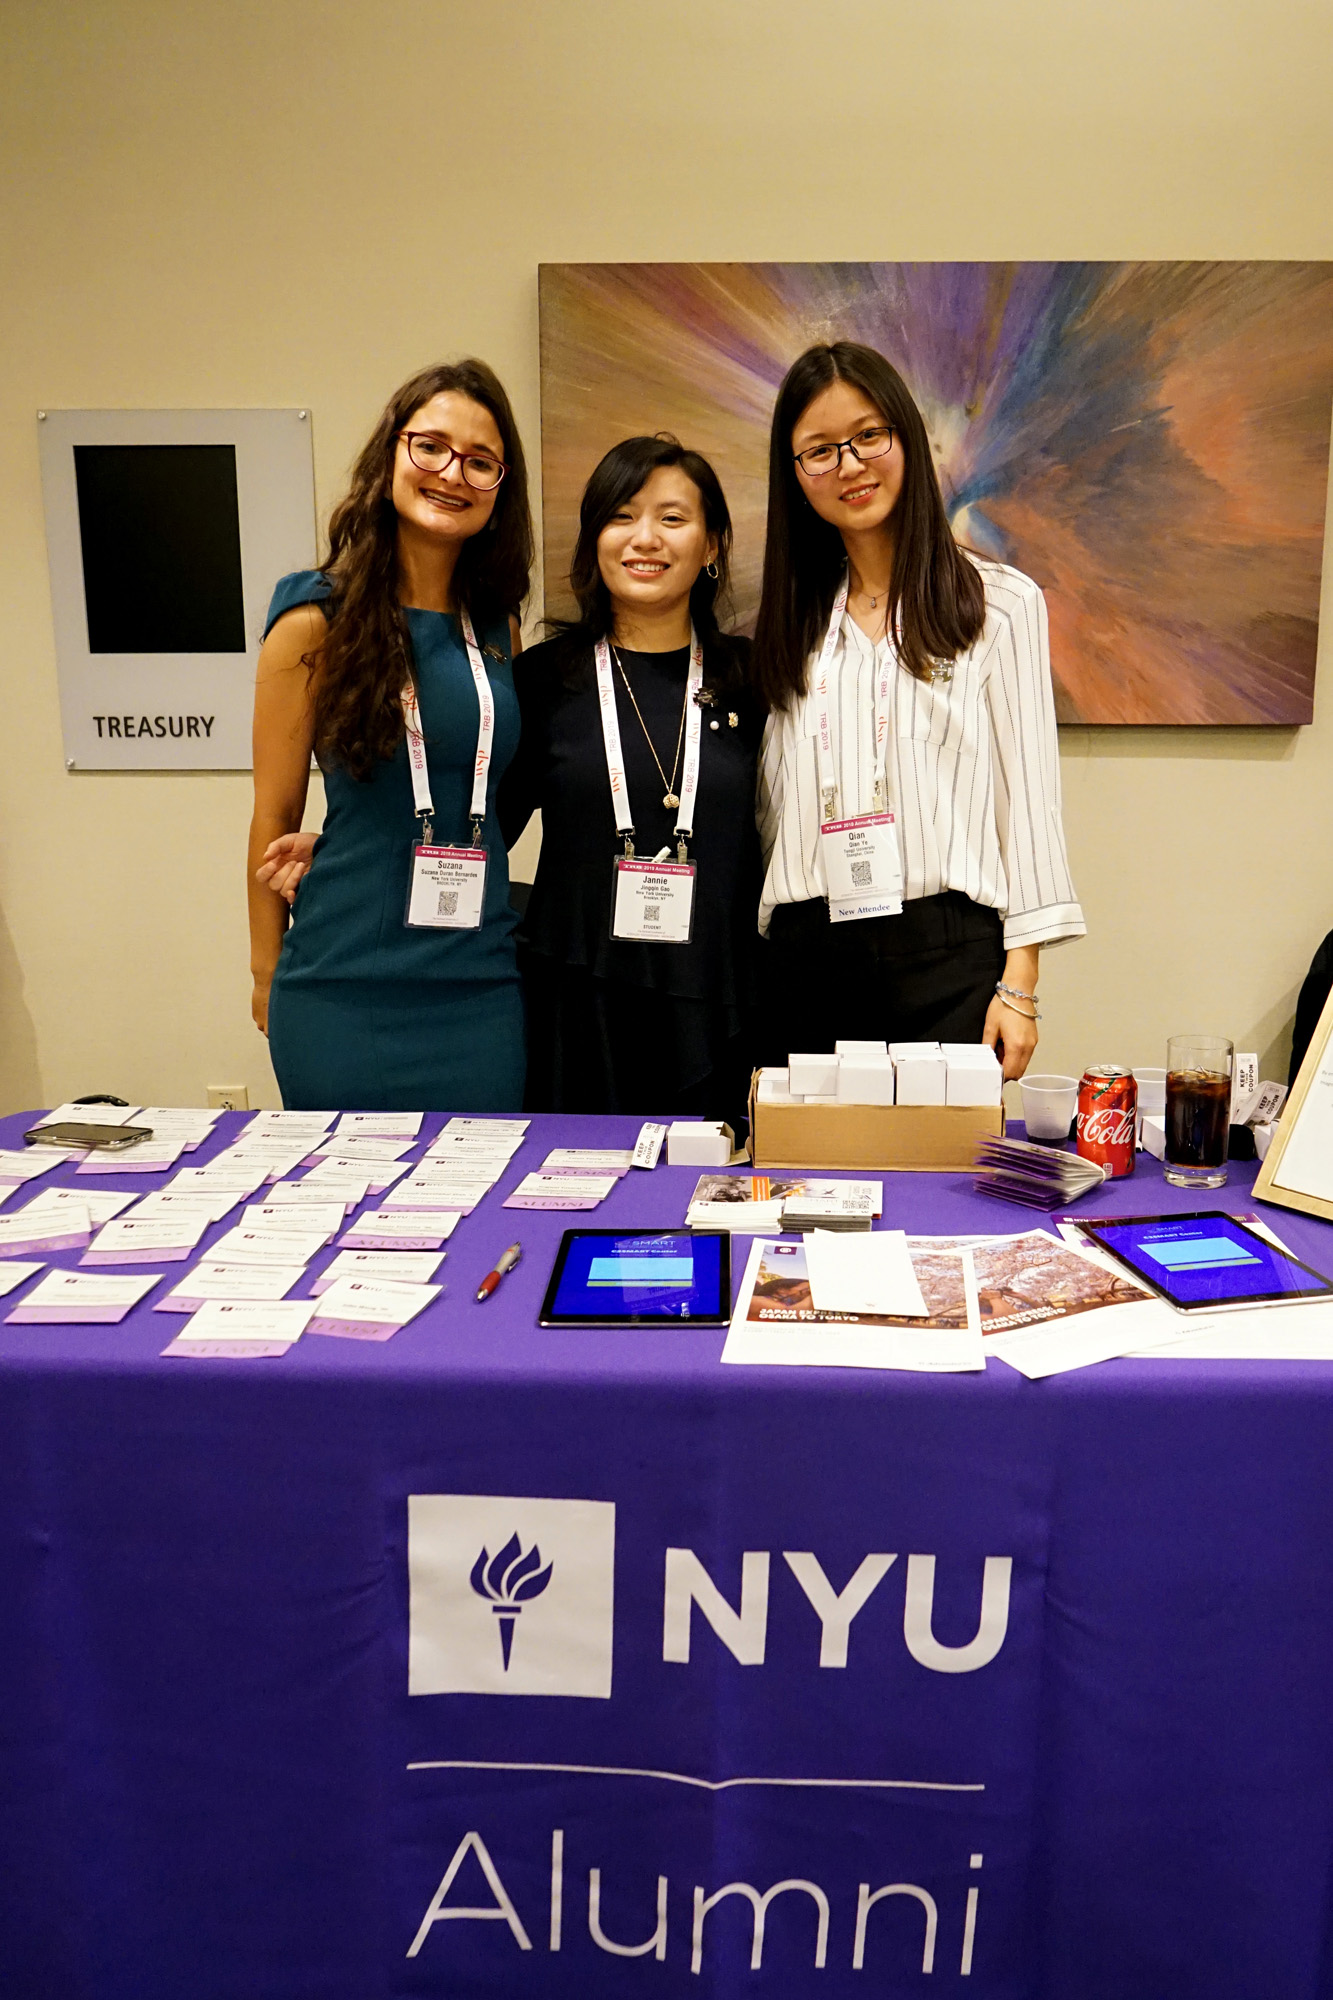 Students Suzana Duran-Bernardes, Jingqin Gao and Qian Ye pose for a picture outside the NYU/C2SMART reception at TRB.